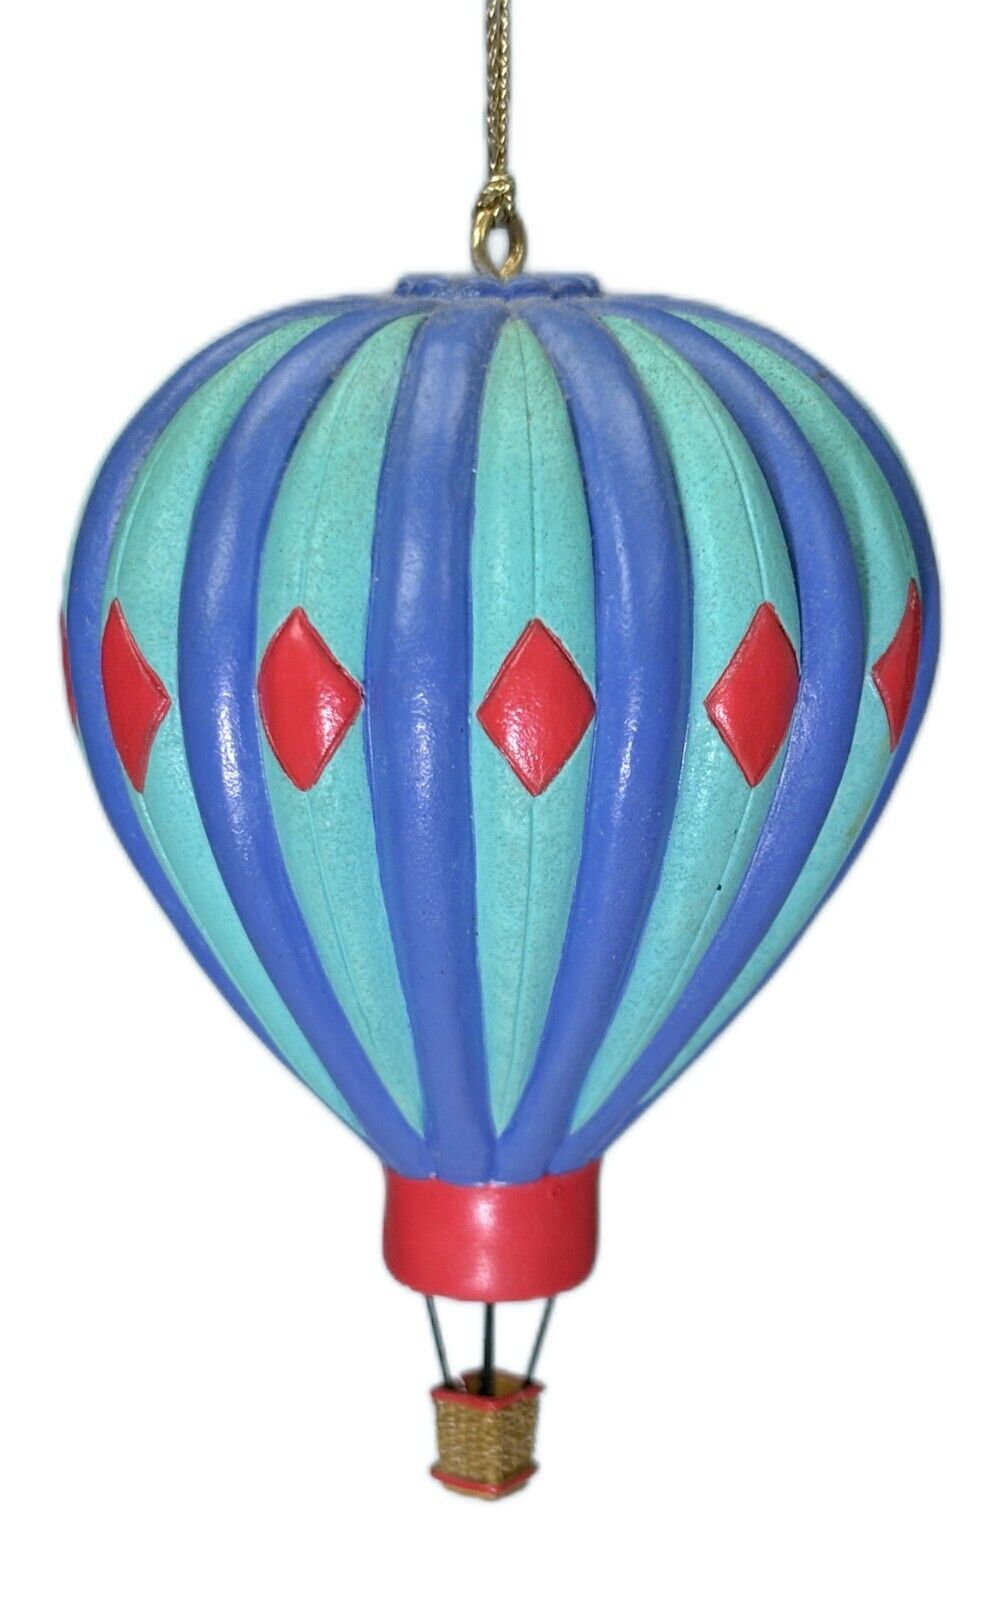 3.5” Hot Air Balloon Painted Wood Christmas Ornament Hanging Blue Green Red